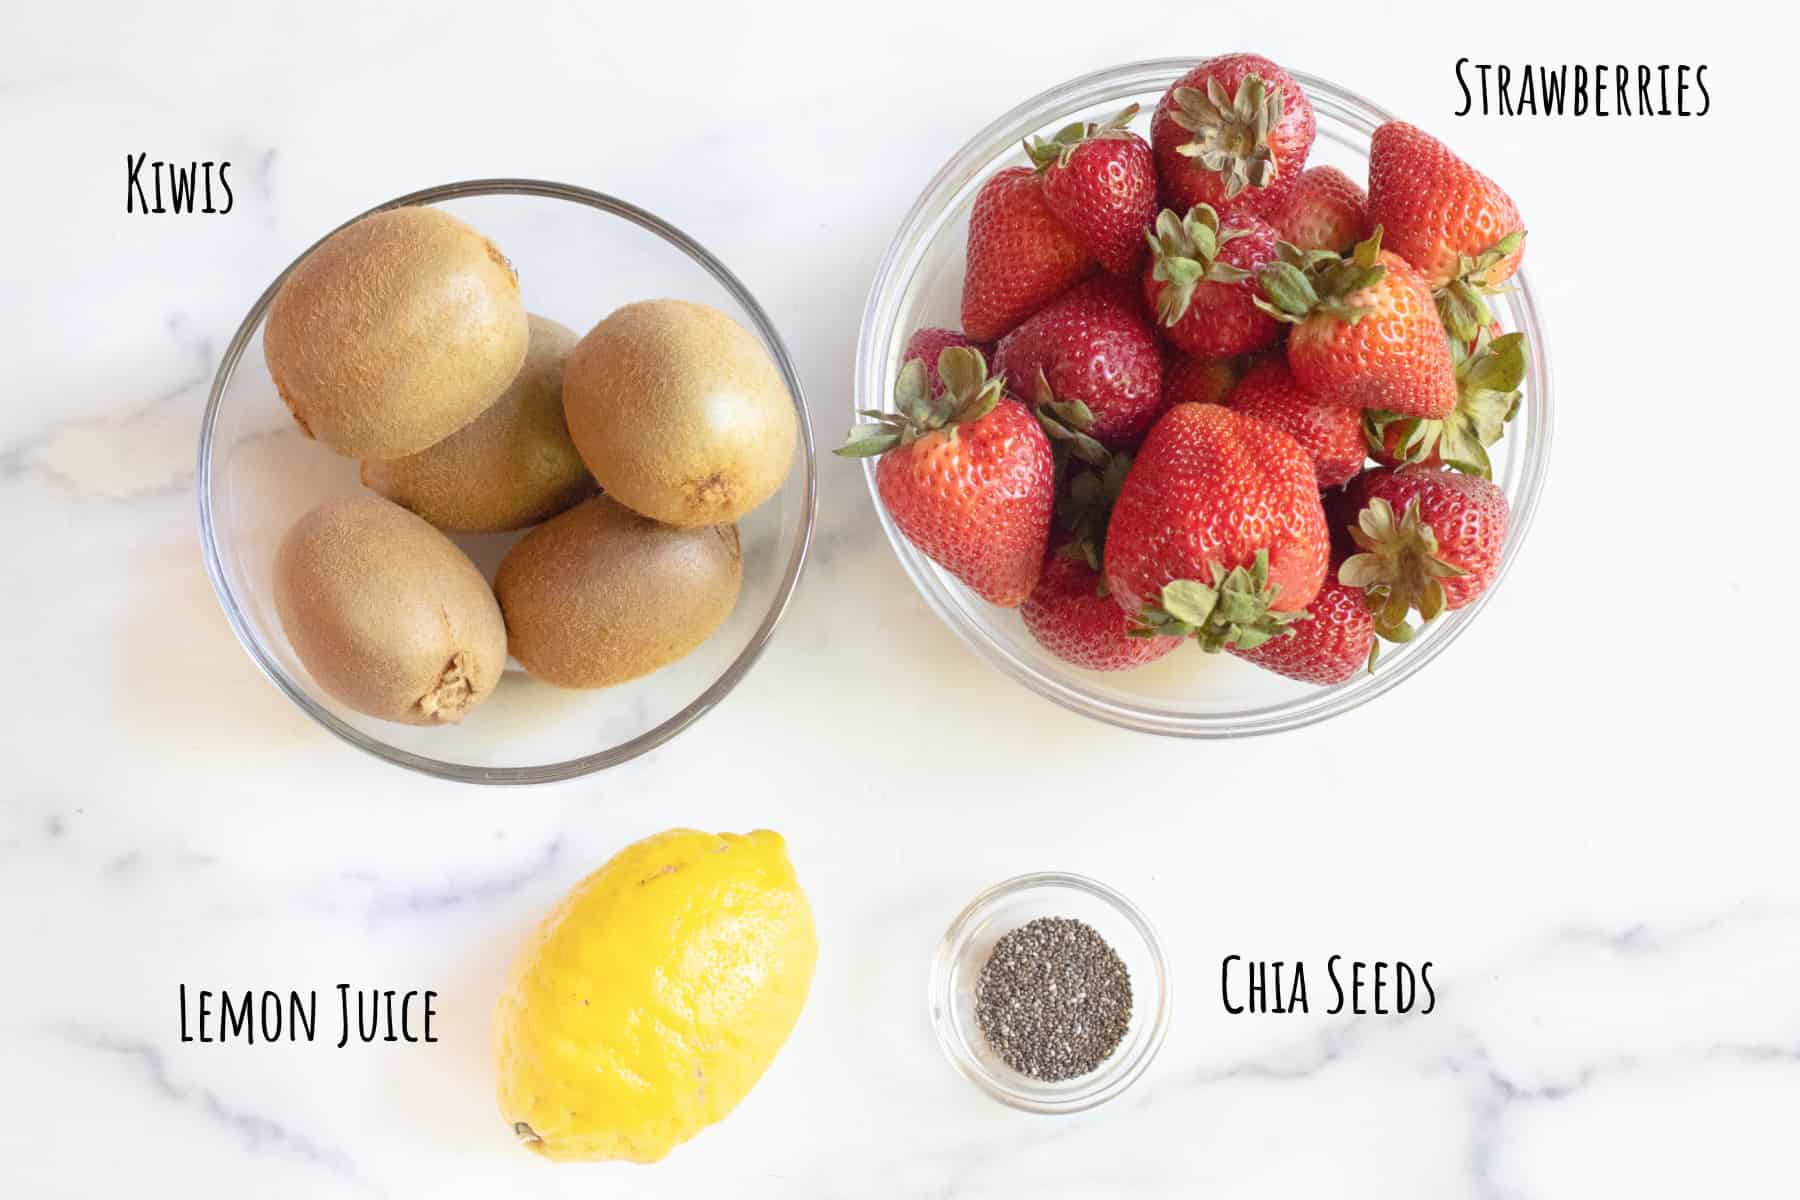 a bowl of kiwis, strawberries, a lemon, and a small bowl of chia seeds.